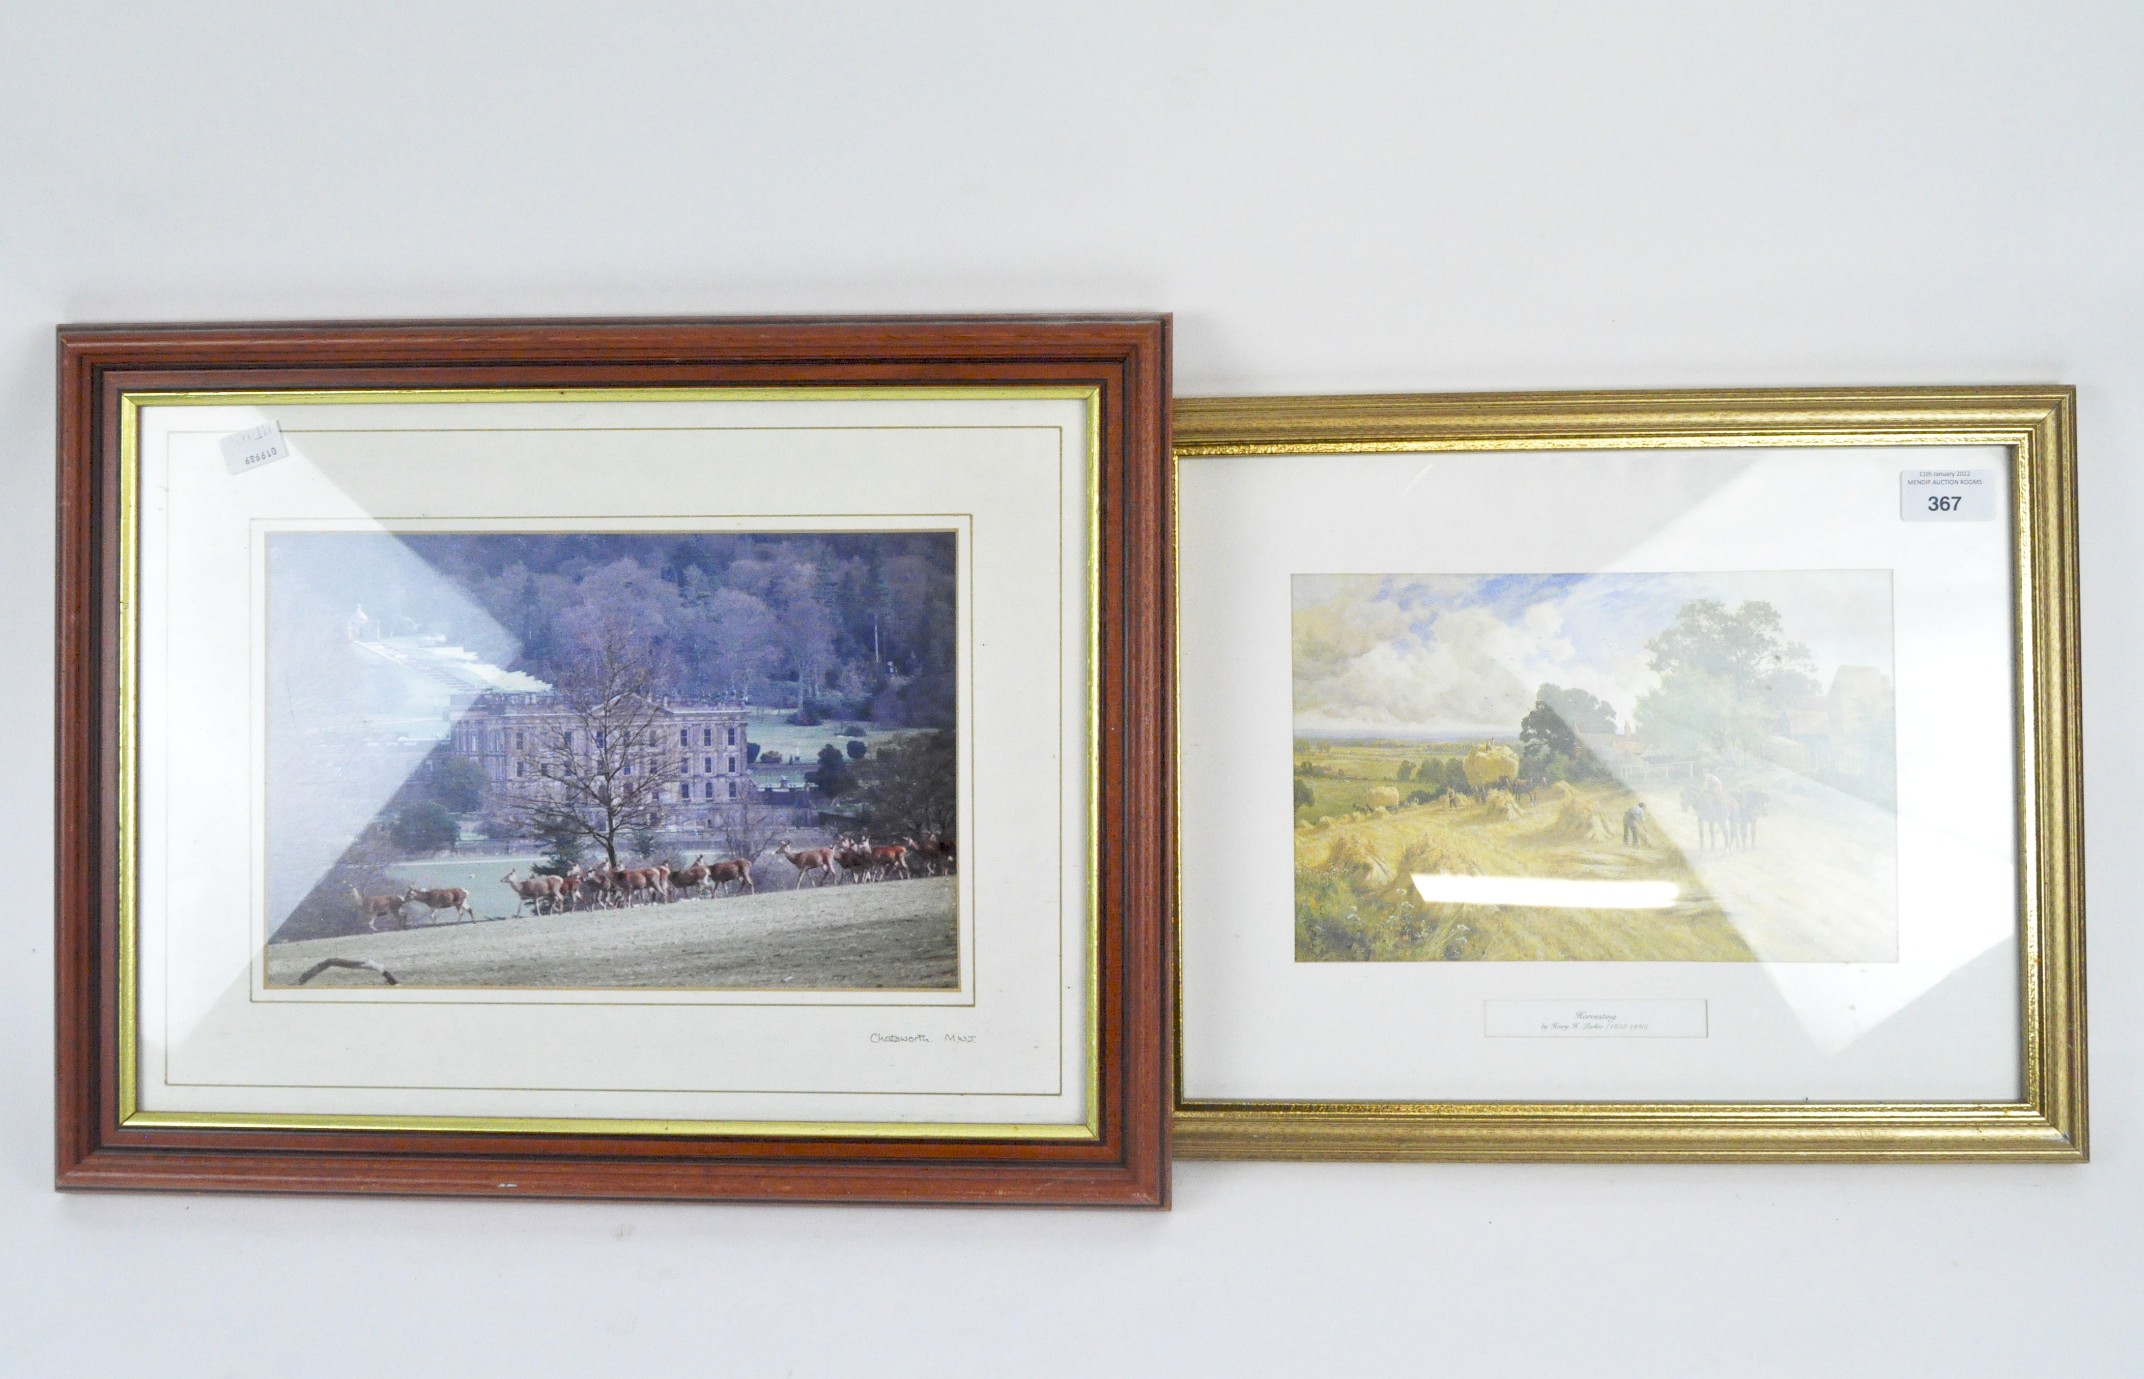 A Henry H. Parker print of 'Harvesting', and a photograph of Chatsworth